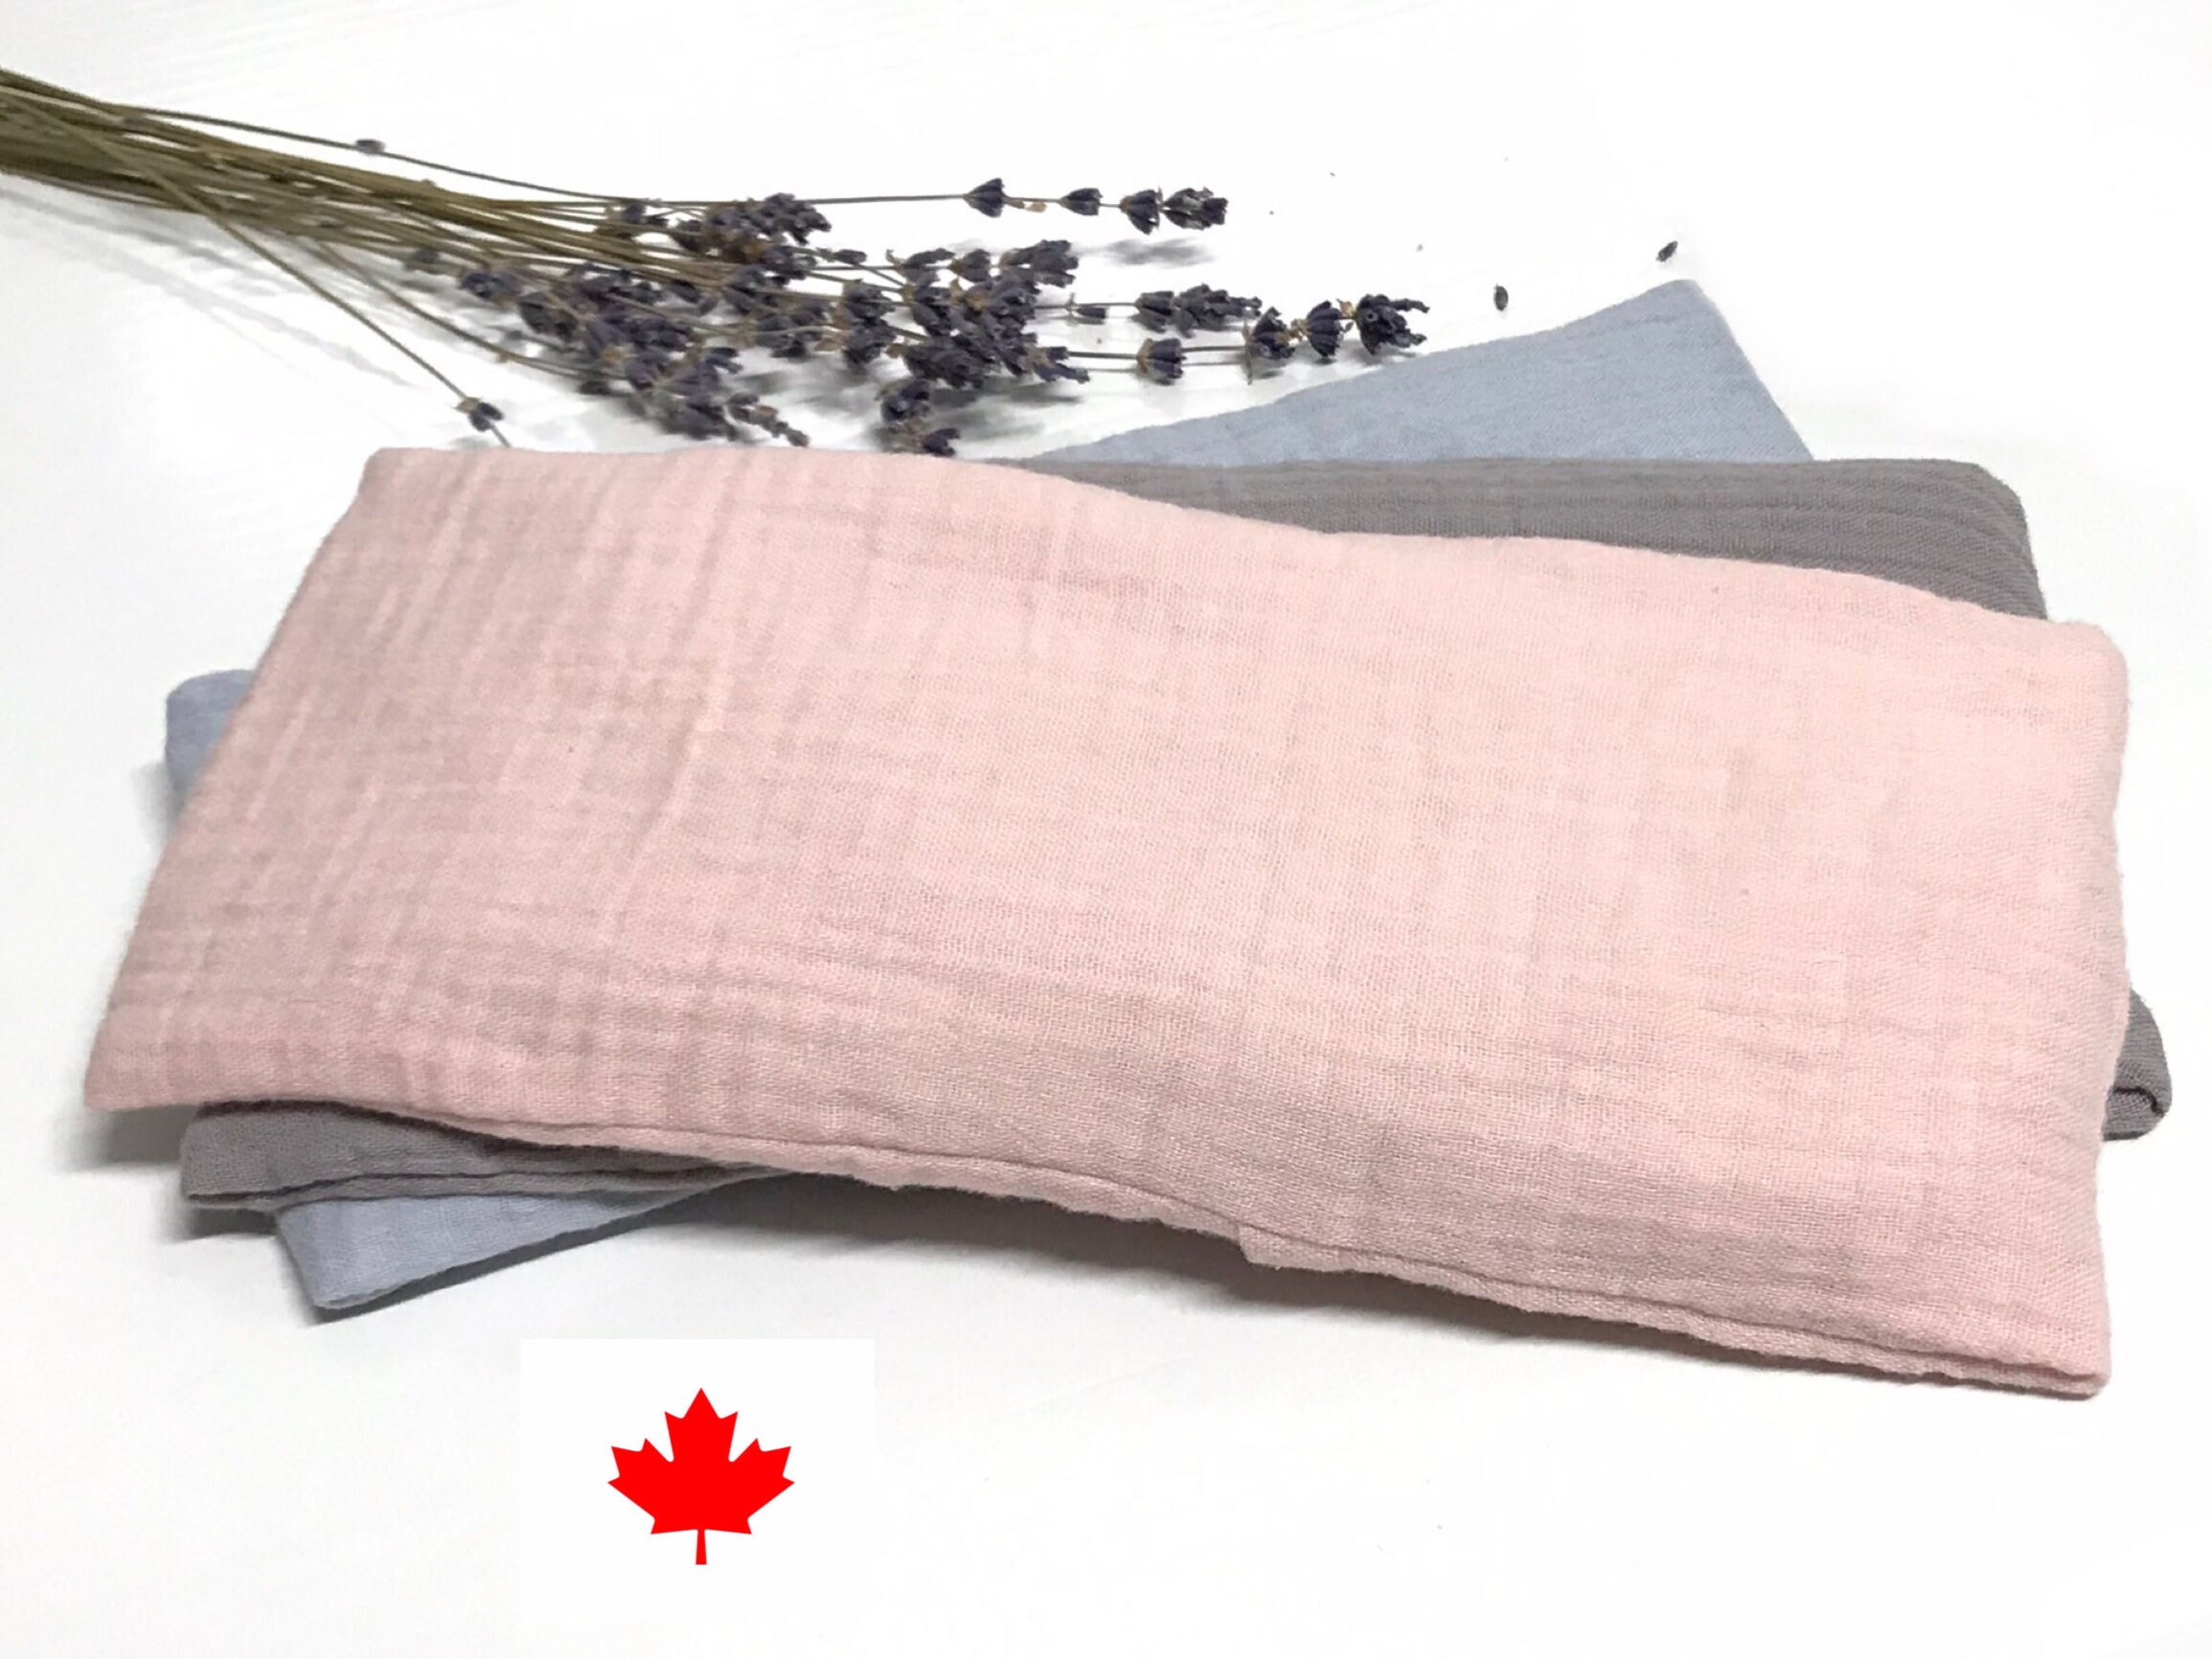 1 Pair of MV Joie Organic Eye Pillow Covers Set with a Zipped Inner Pouch/DIY Eye Pillow/Make it Your own/Yoga Meditation Eye Pillow/Comes with Free Waterproof Pouches 